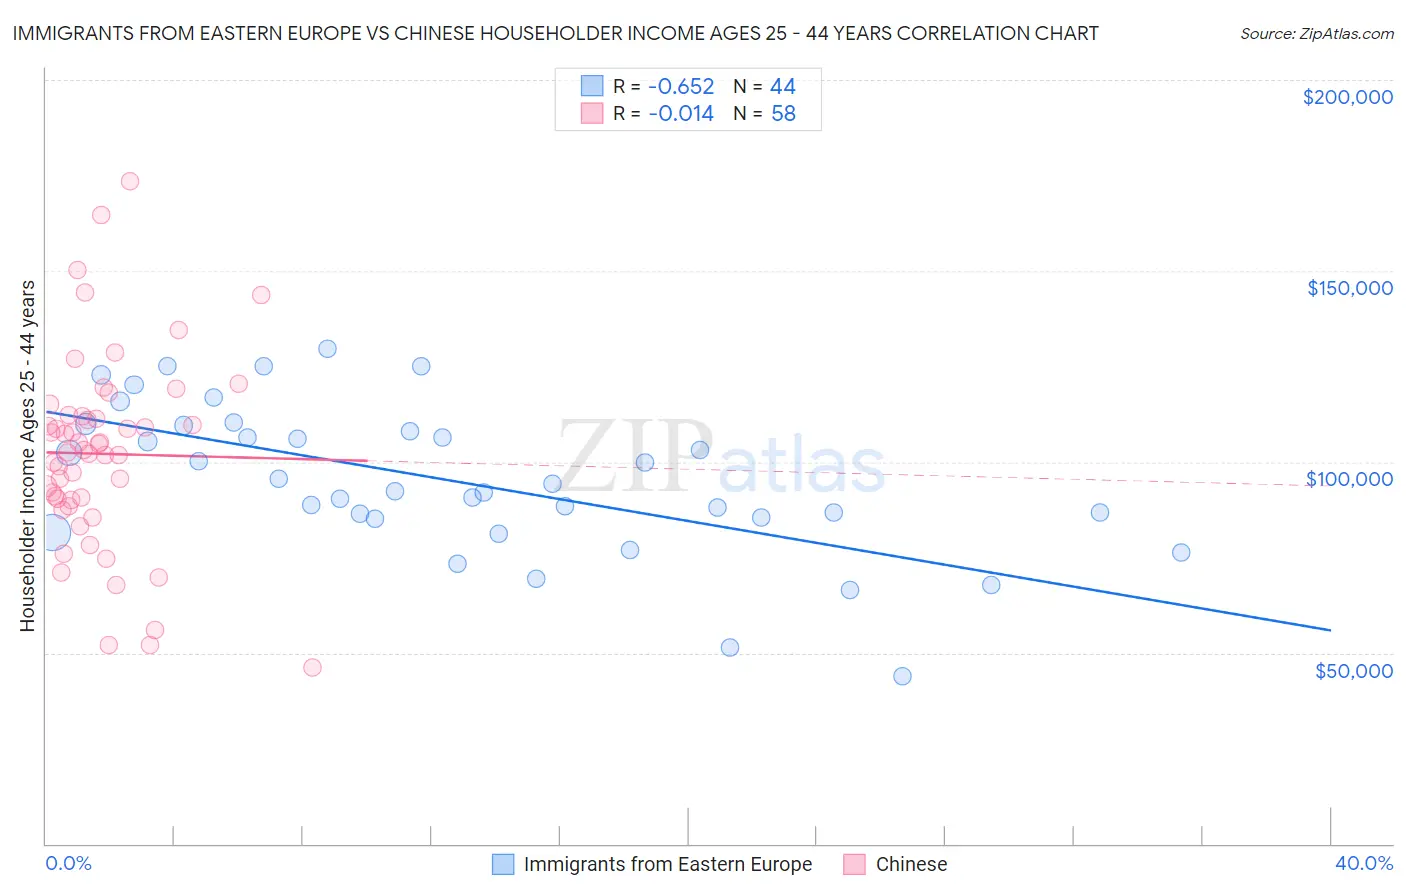 Immigrants from Eastern Europe vs Chinese Householder Income Ages 25 - 44 years